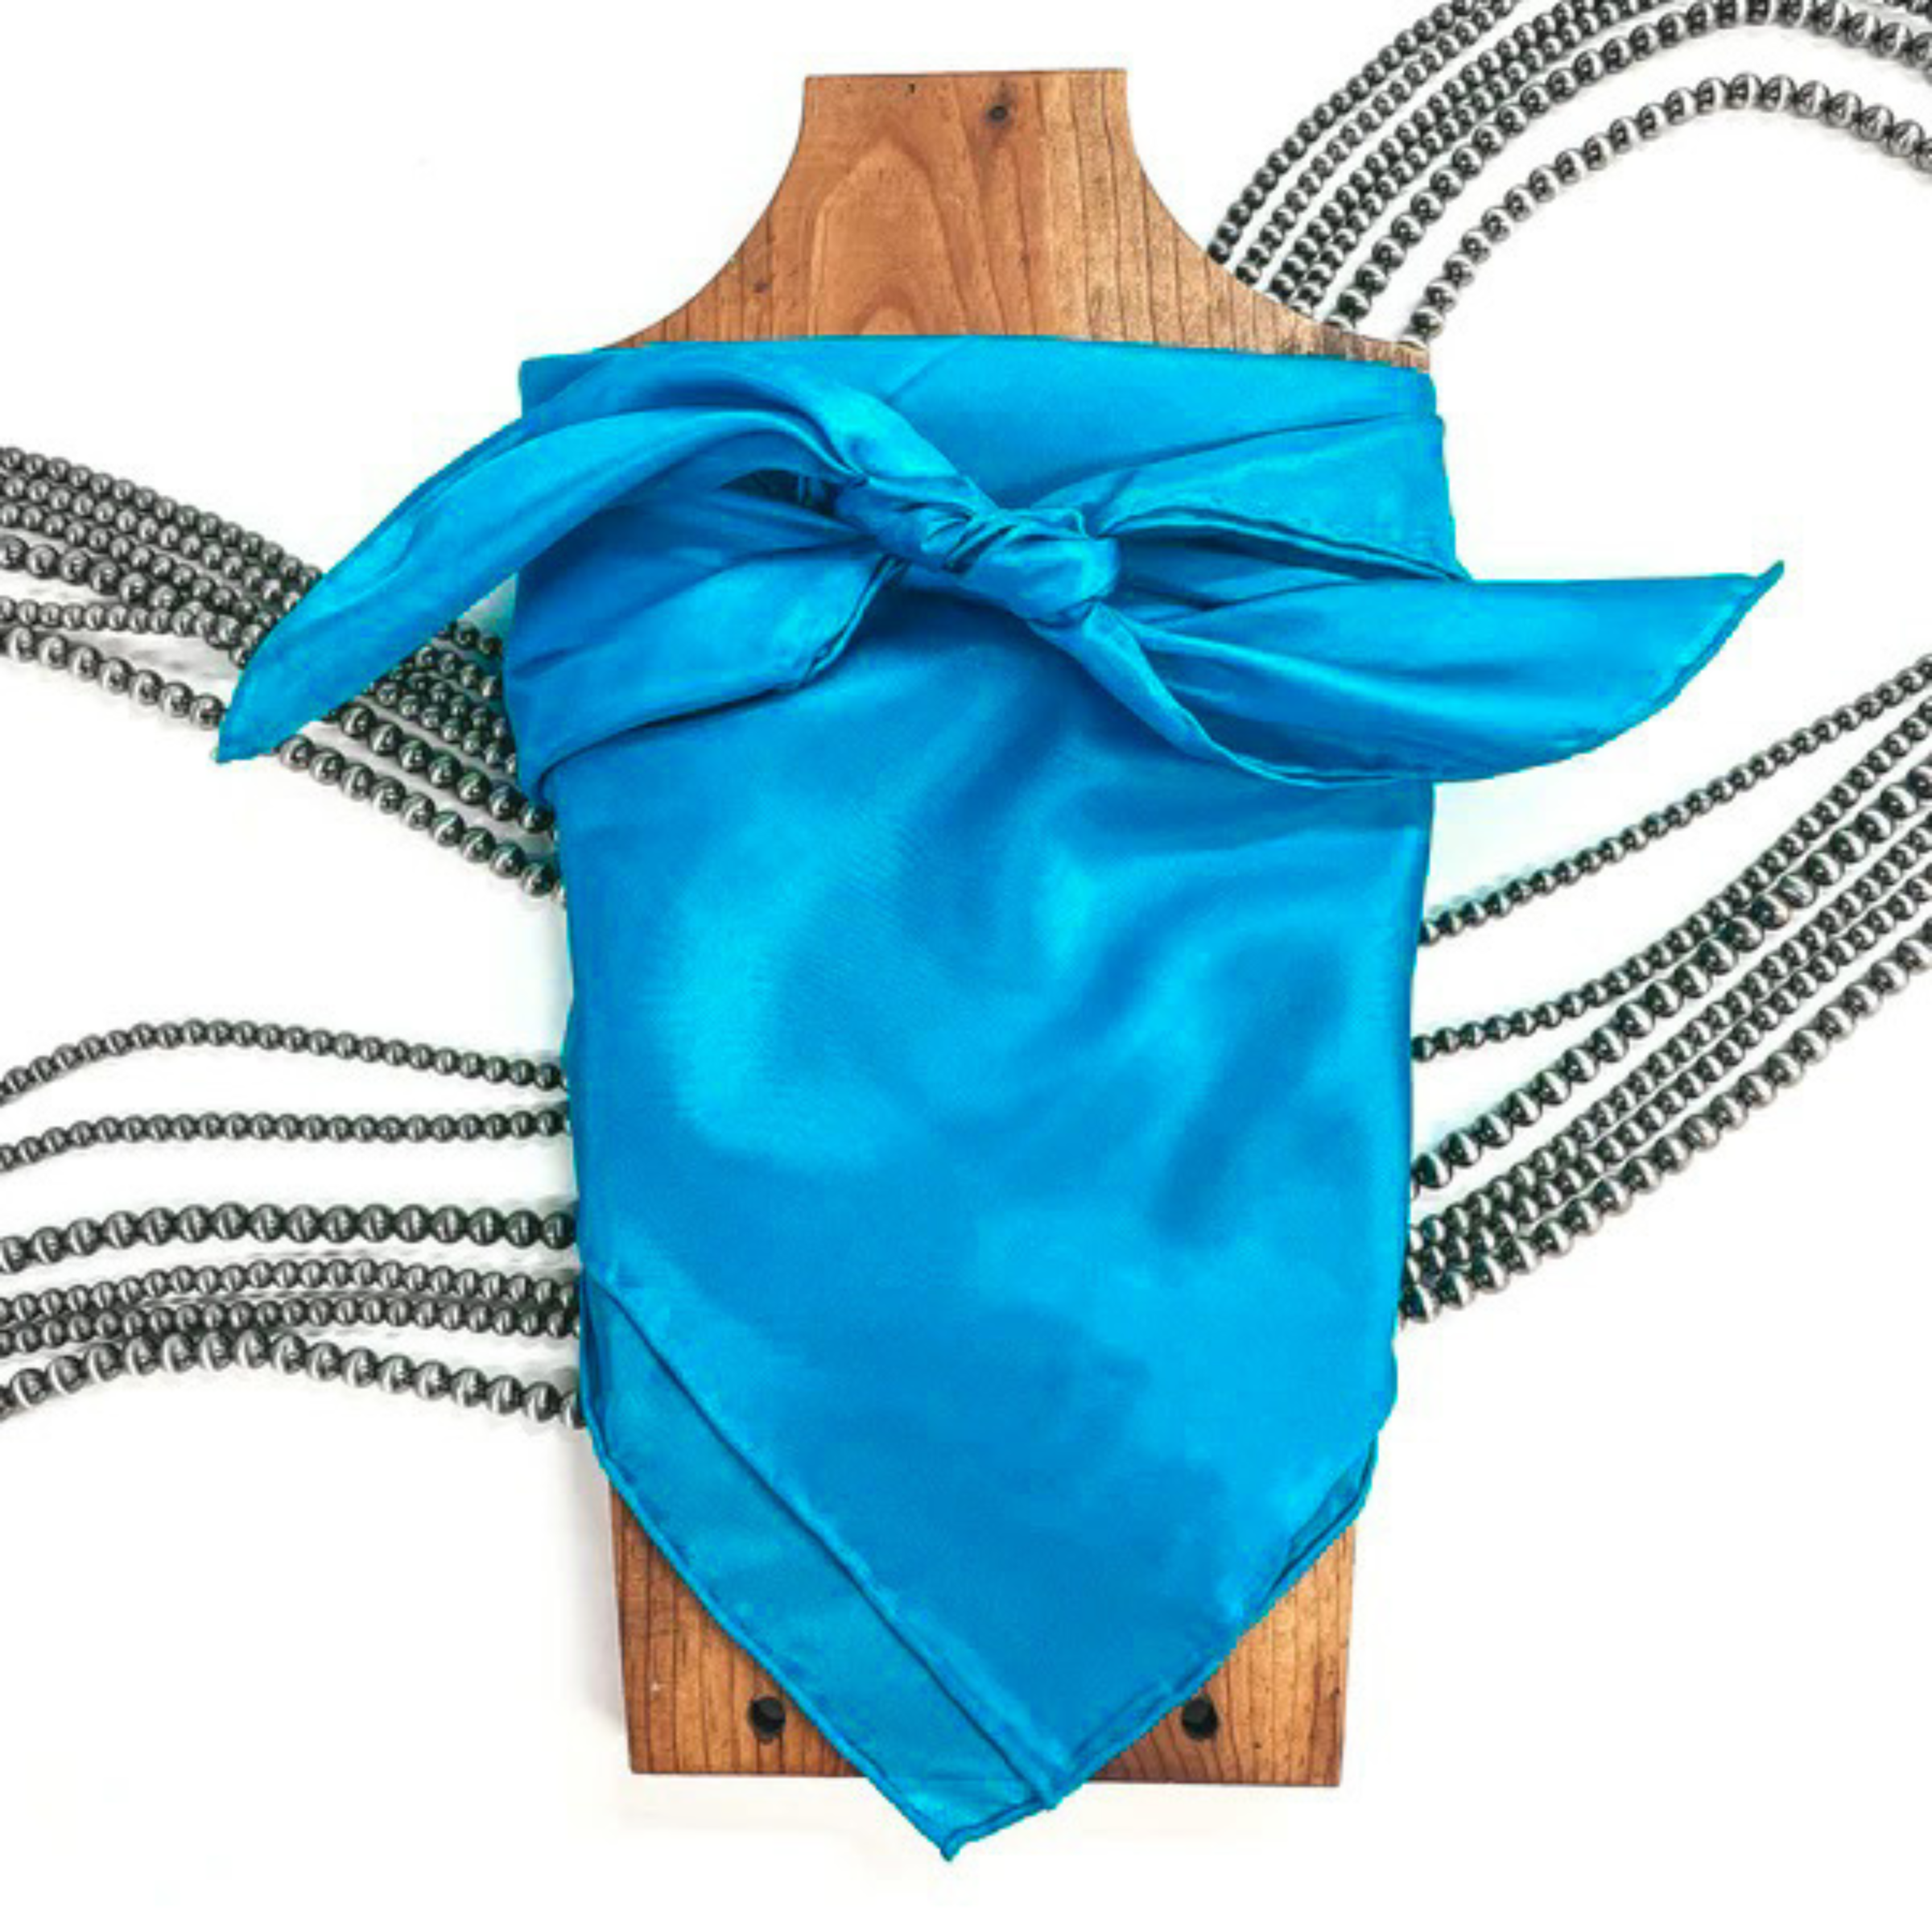 This is a turquoise silk wild rag, this wild rag is placed on a brown necklace board. This wild rag is taken on a white background and with silver Navajo pearls in the back as decor.